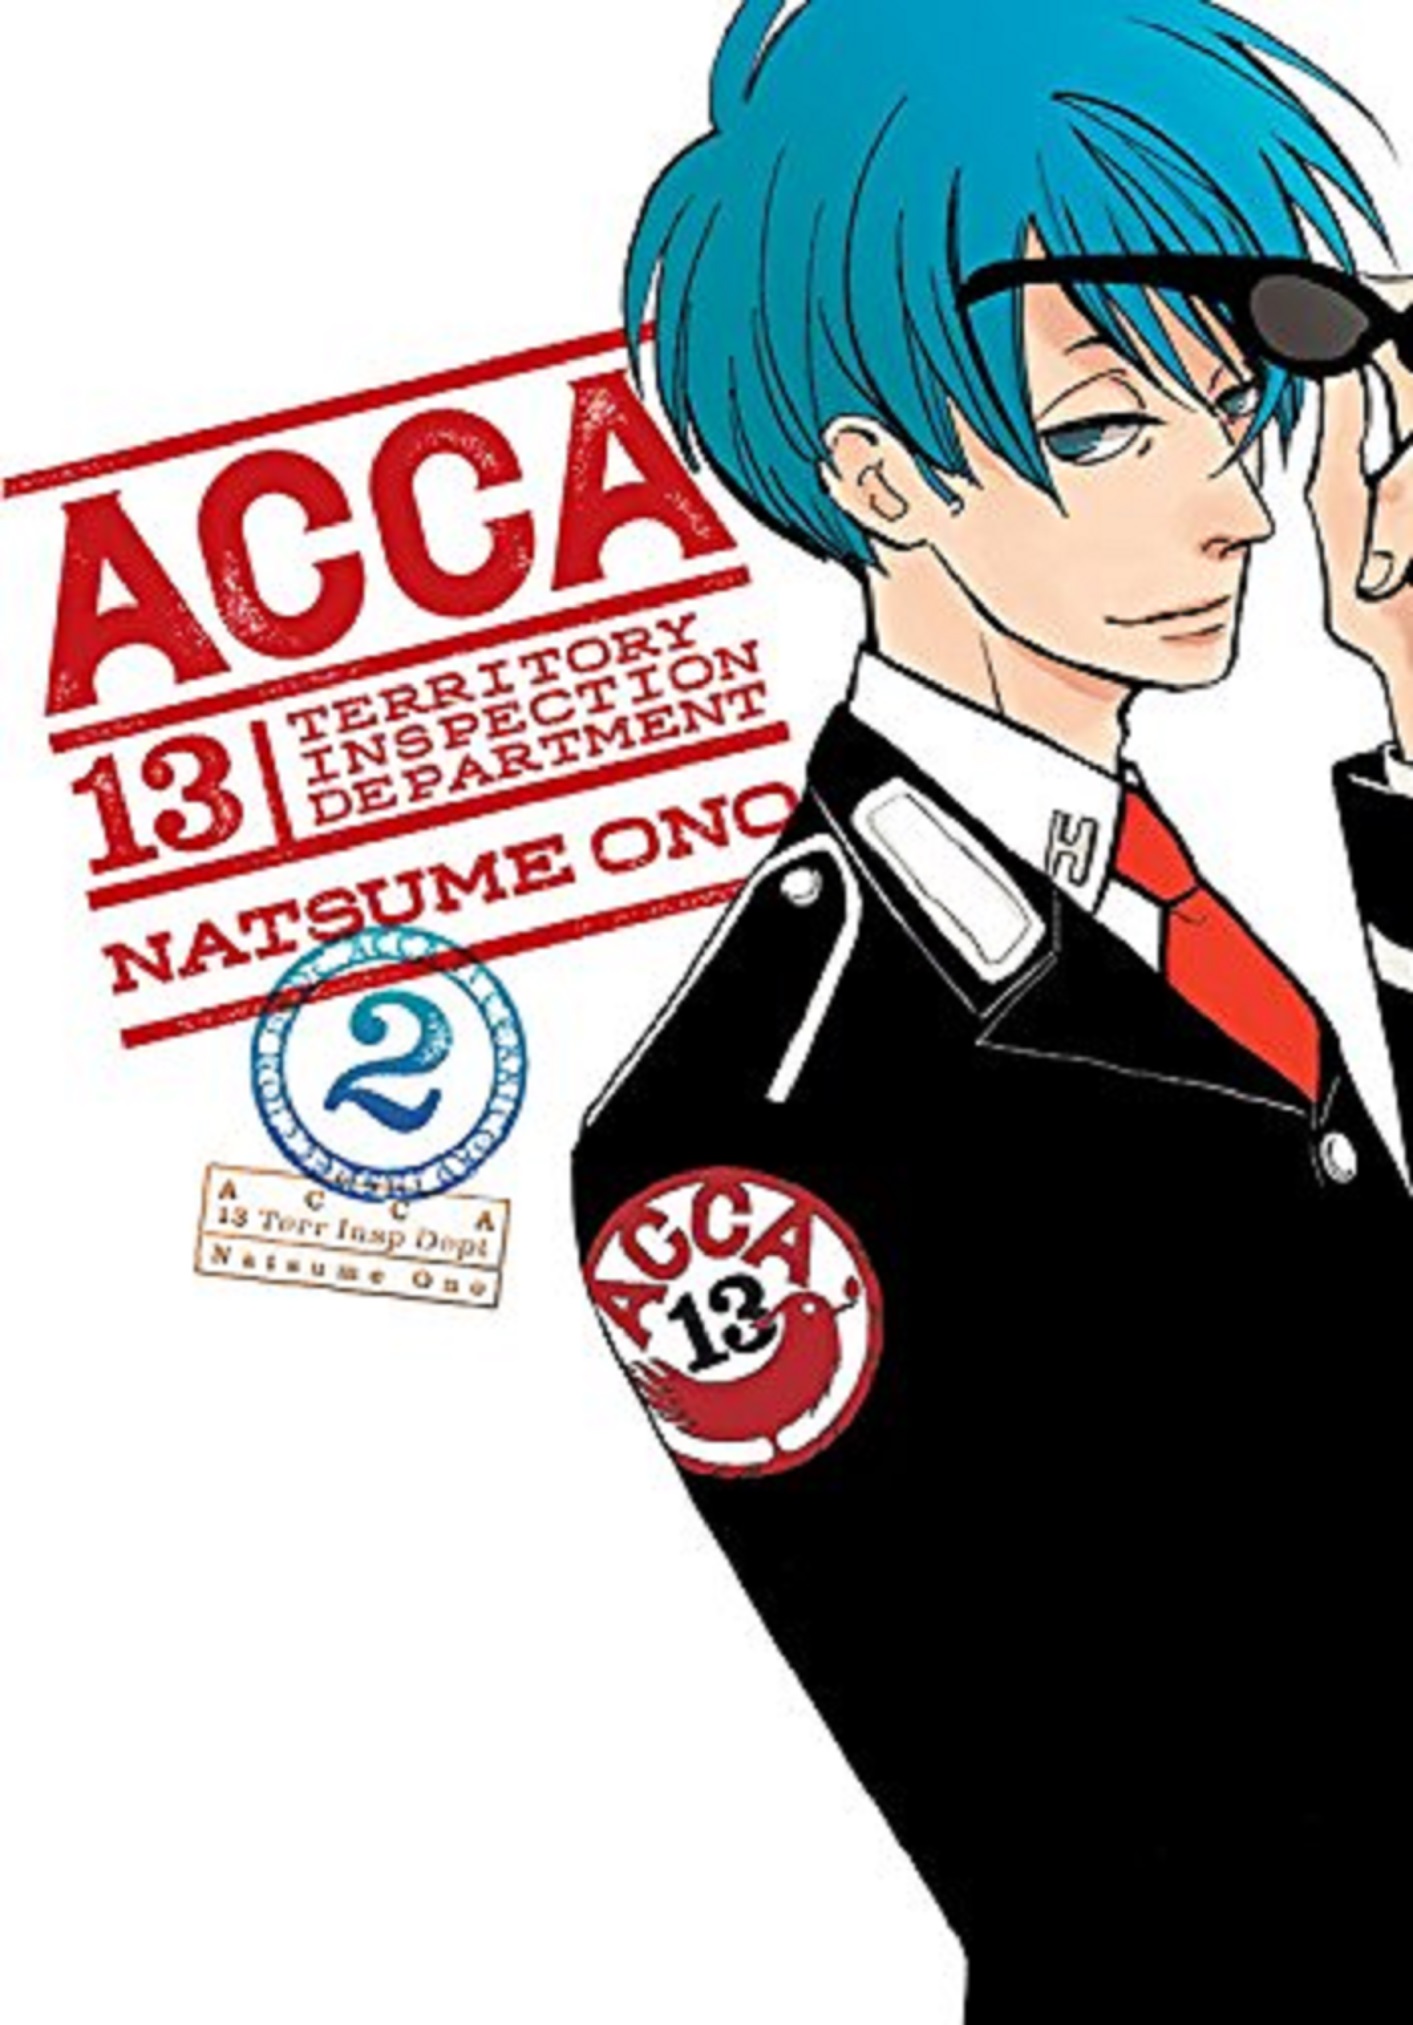 ACCA 13-Territory Inspection Department - Volume 2 | Natsume Ono